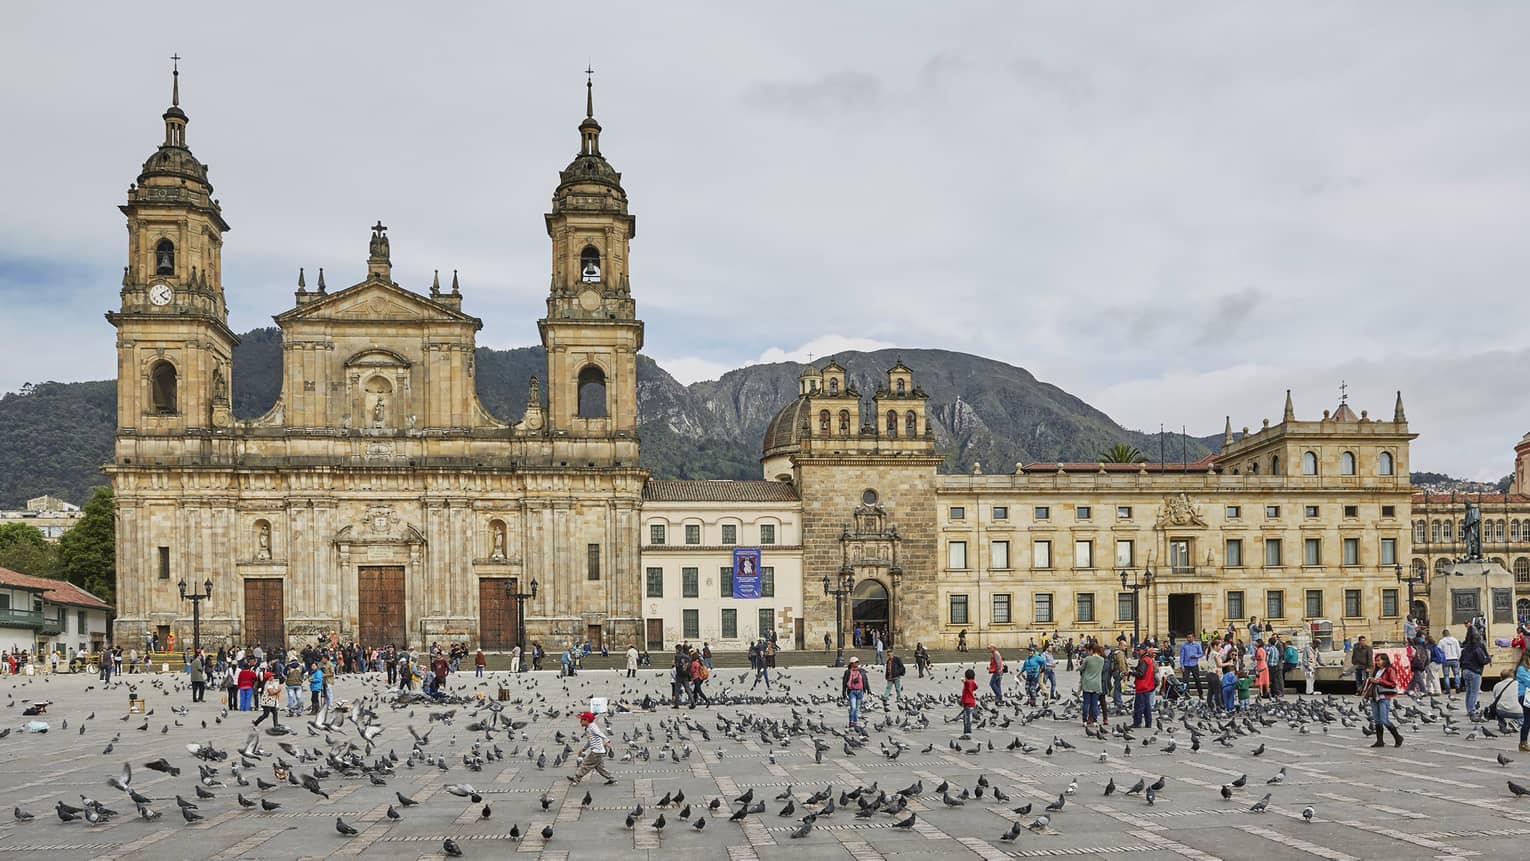 Pigeons and people crowd Bolivar Square in front of historic brick church, The Primatial Cathedral of Bogotá